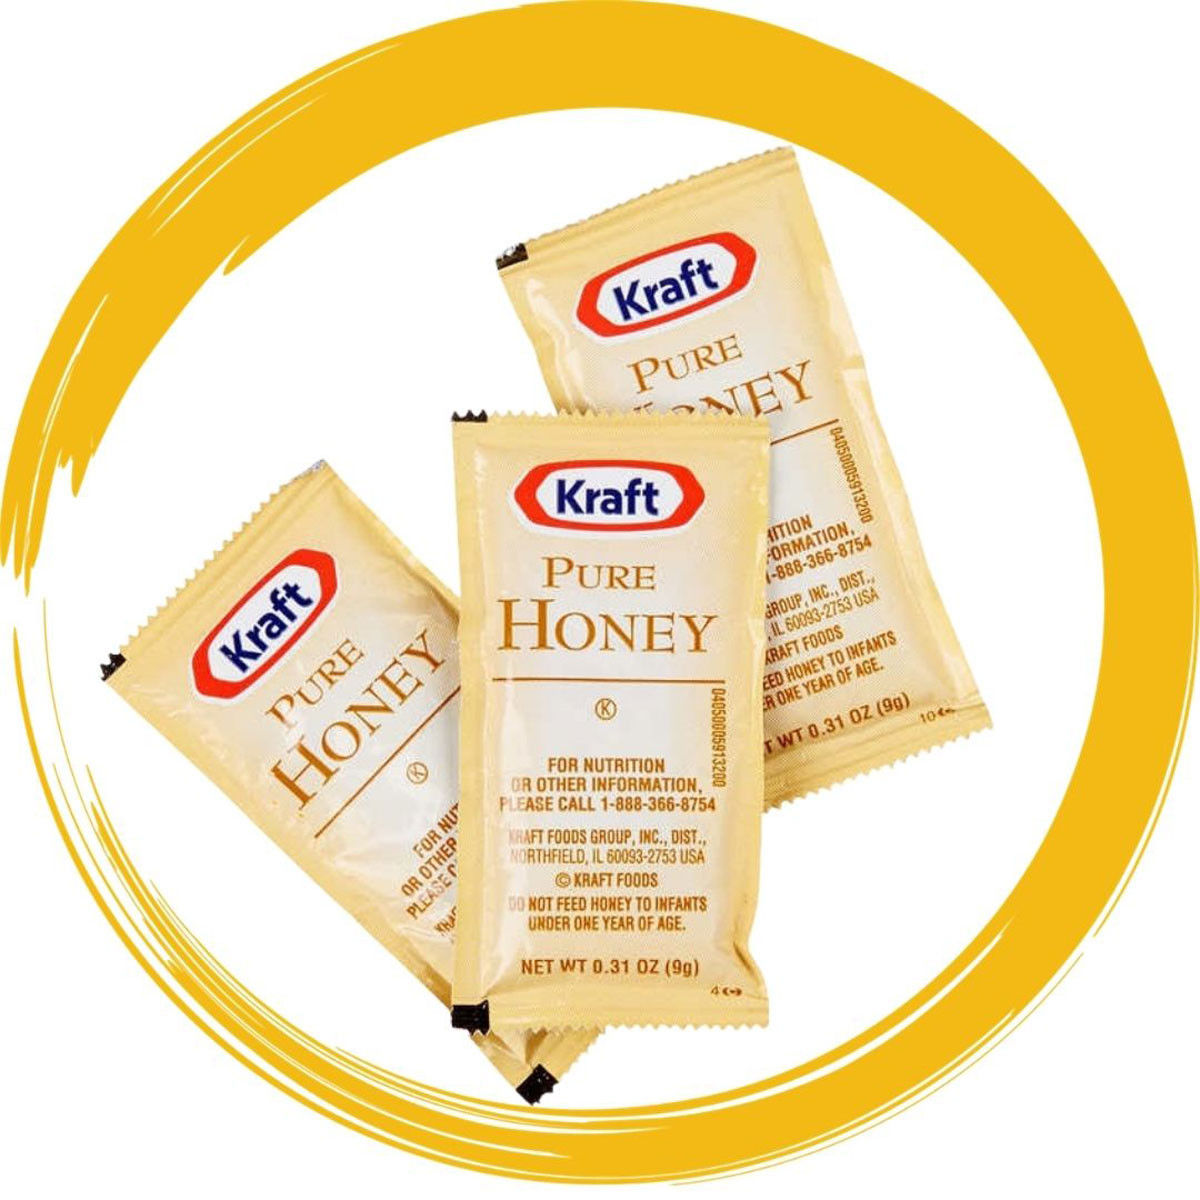 How much does each individual packet weigh in the Kraft Pure Honey Packets (100 count)?